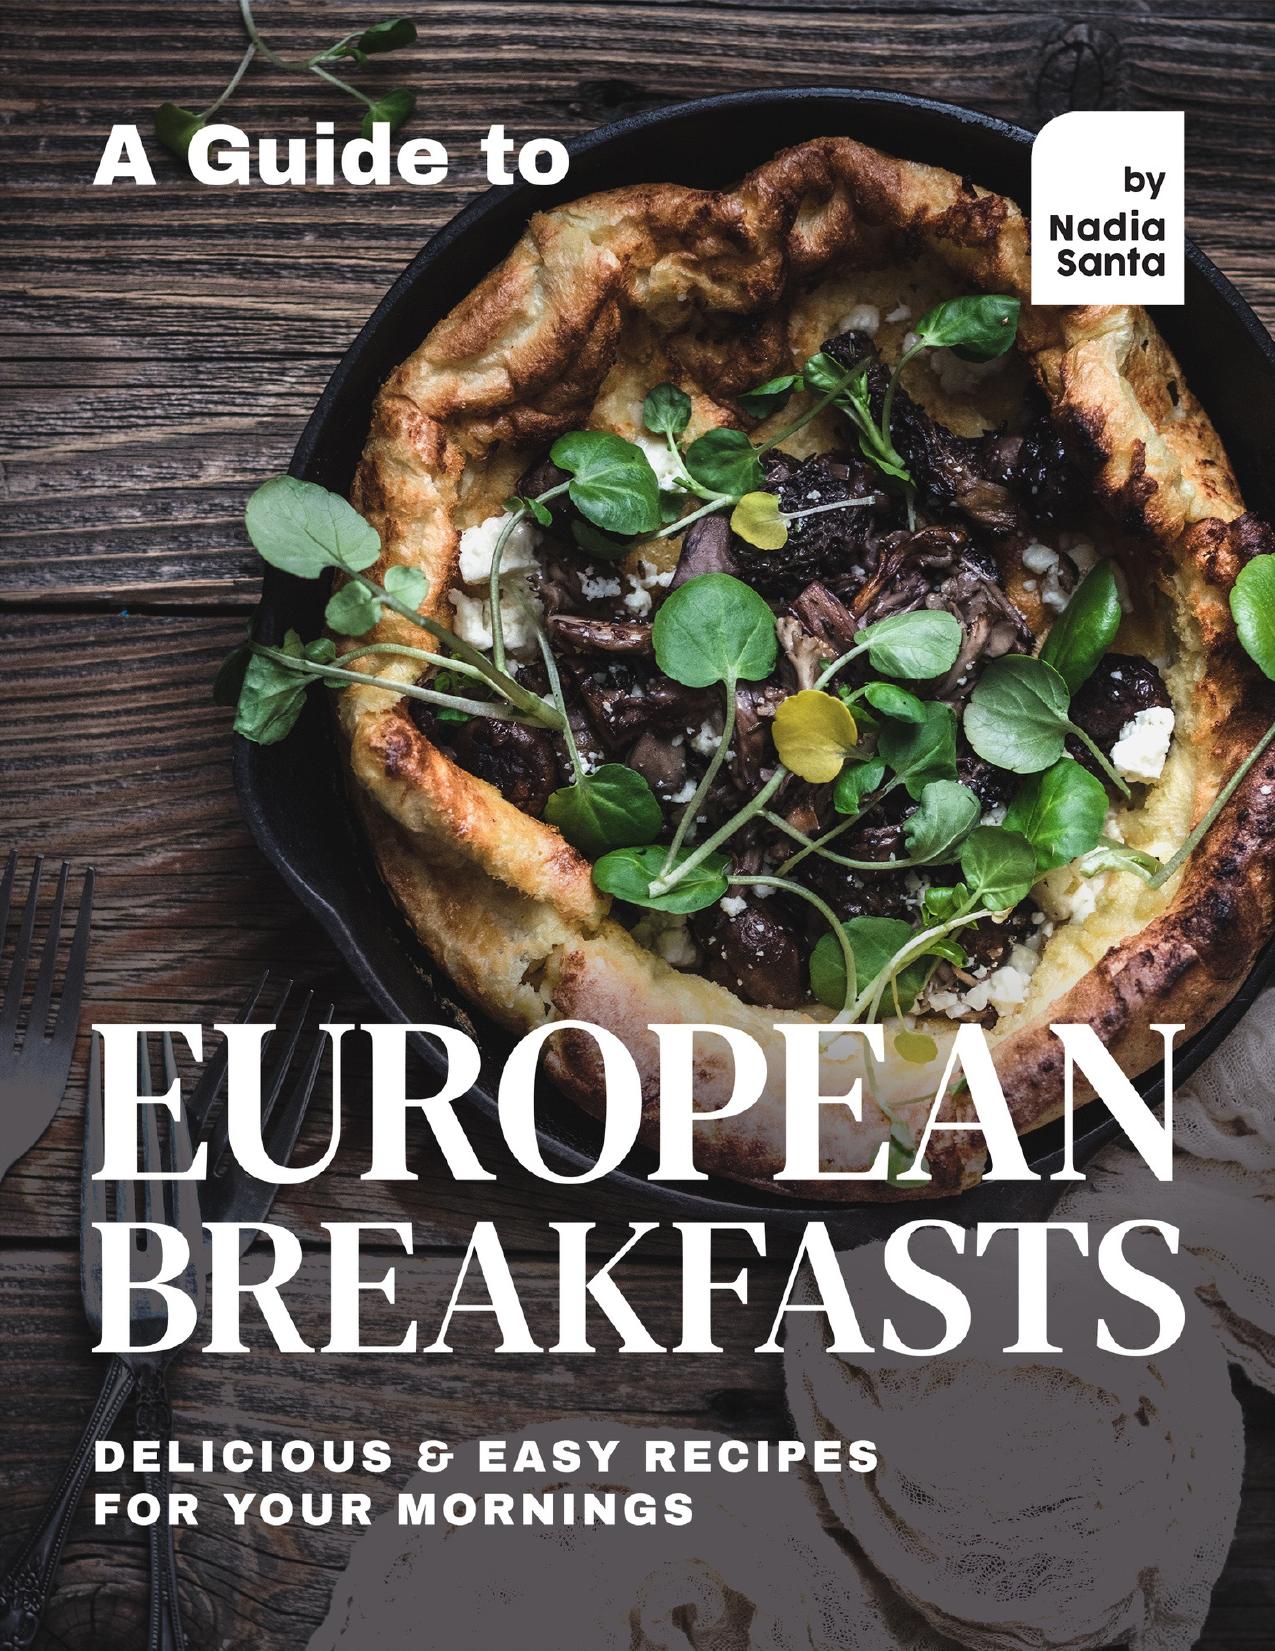 A Guide to European Breakfasts: Delicious & Easy Recipes for Your Mornings by Santa Nadia